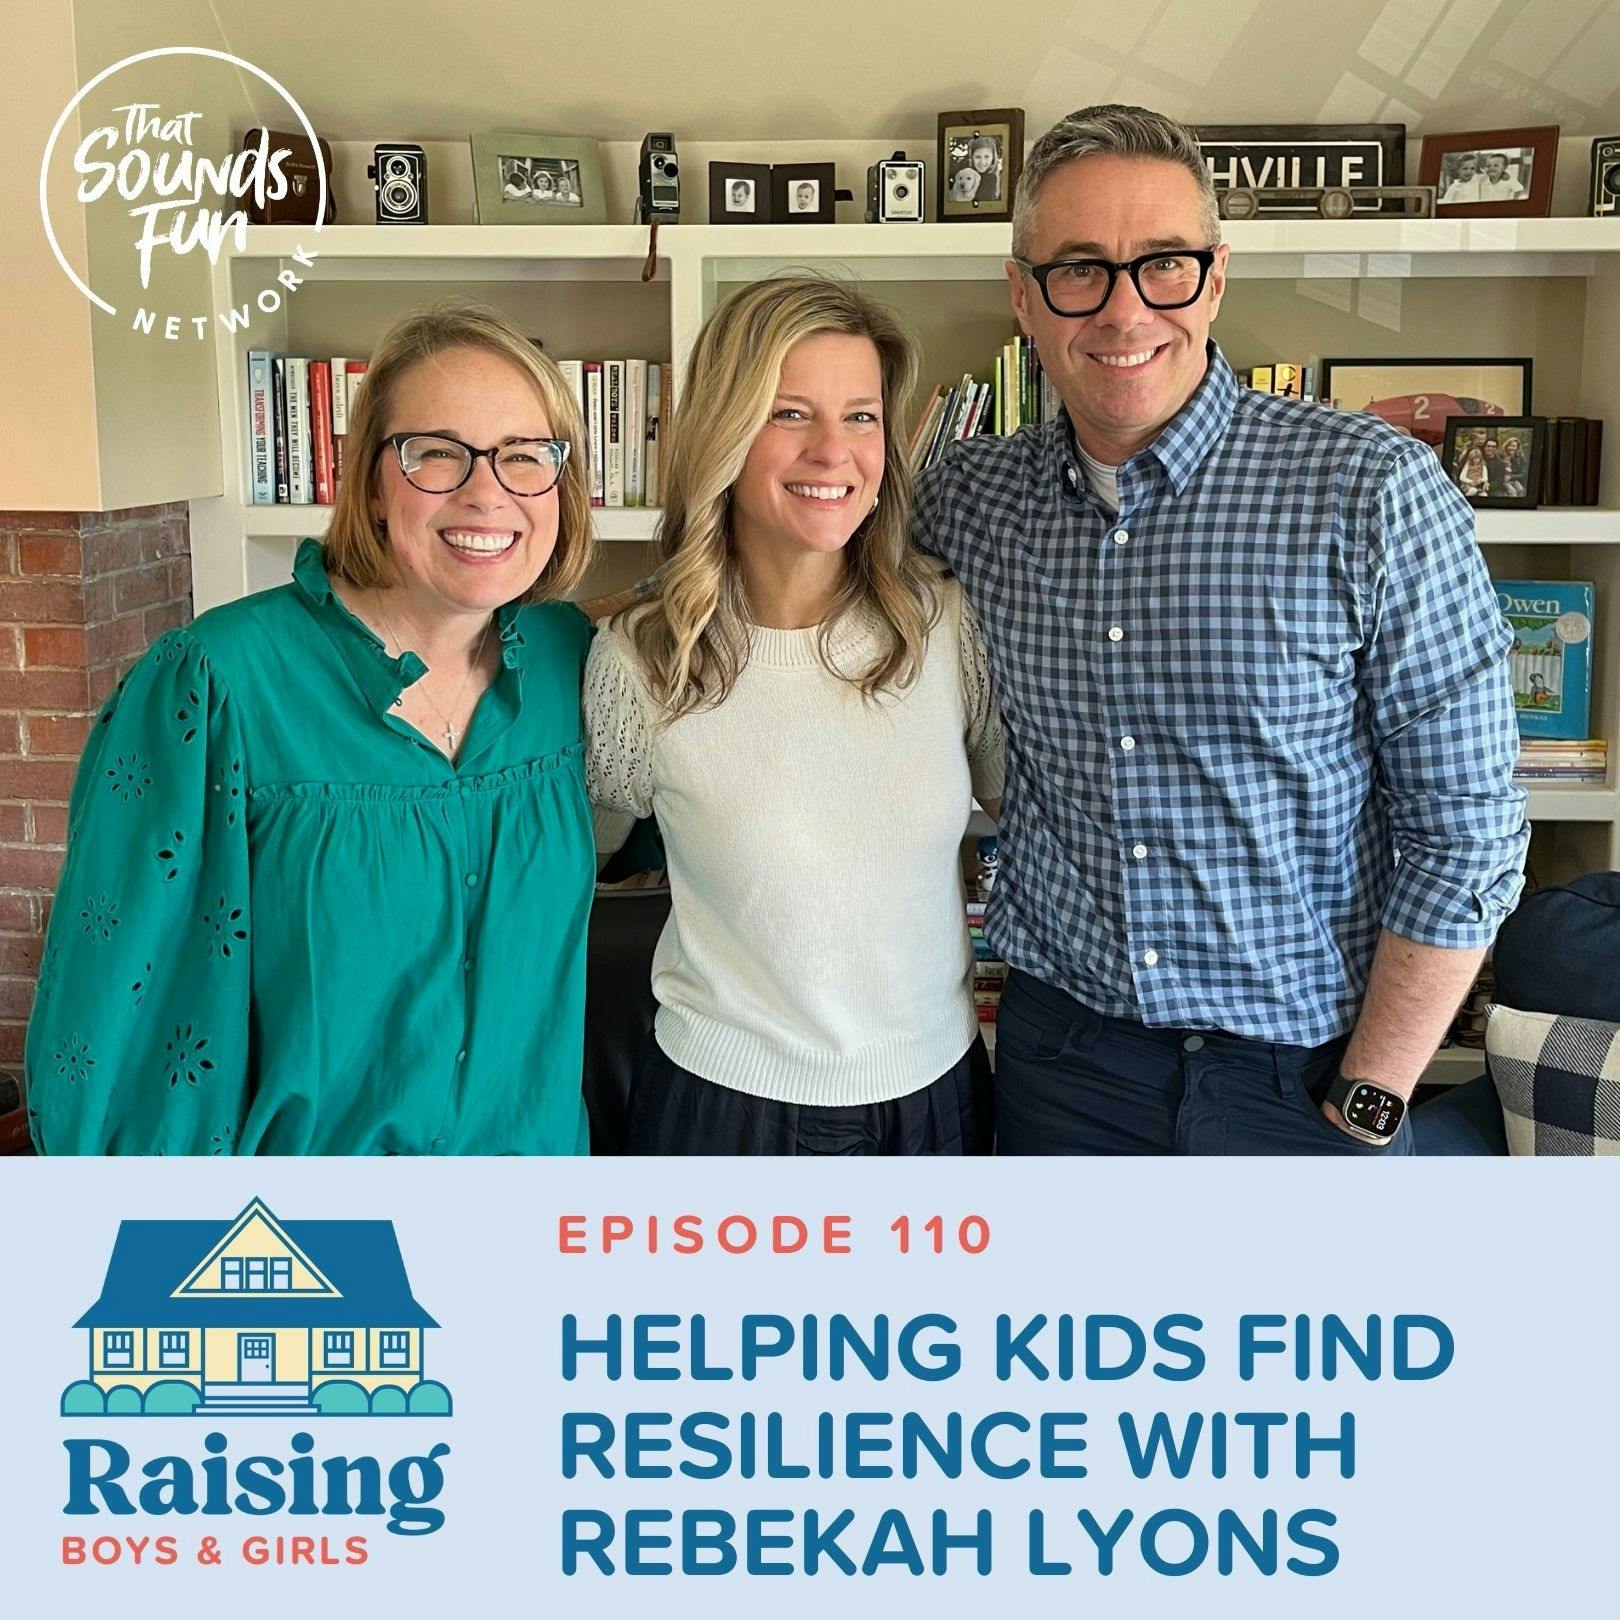 Episode 110: Helping Kids Find Resilience with Rebekah Lyons